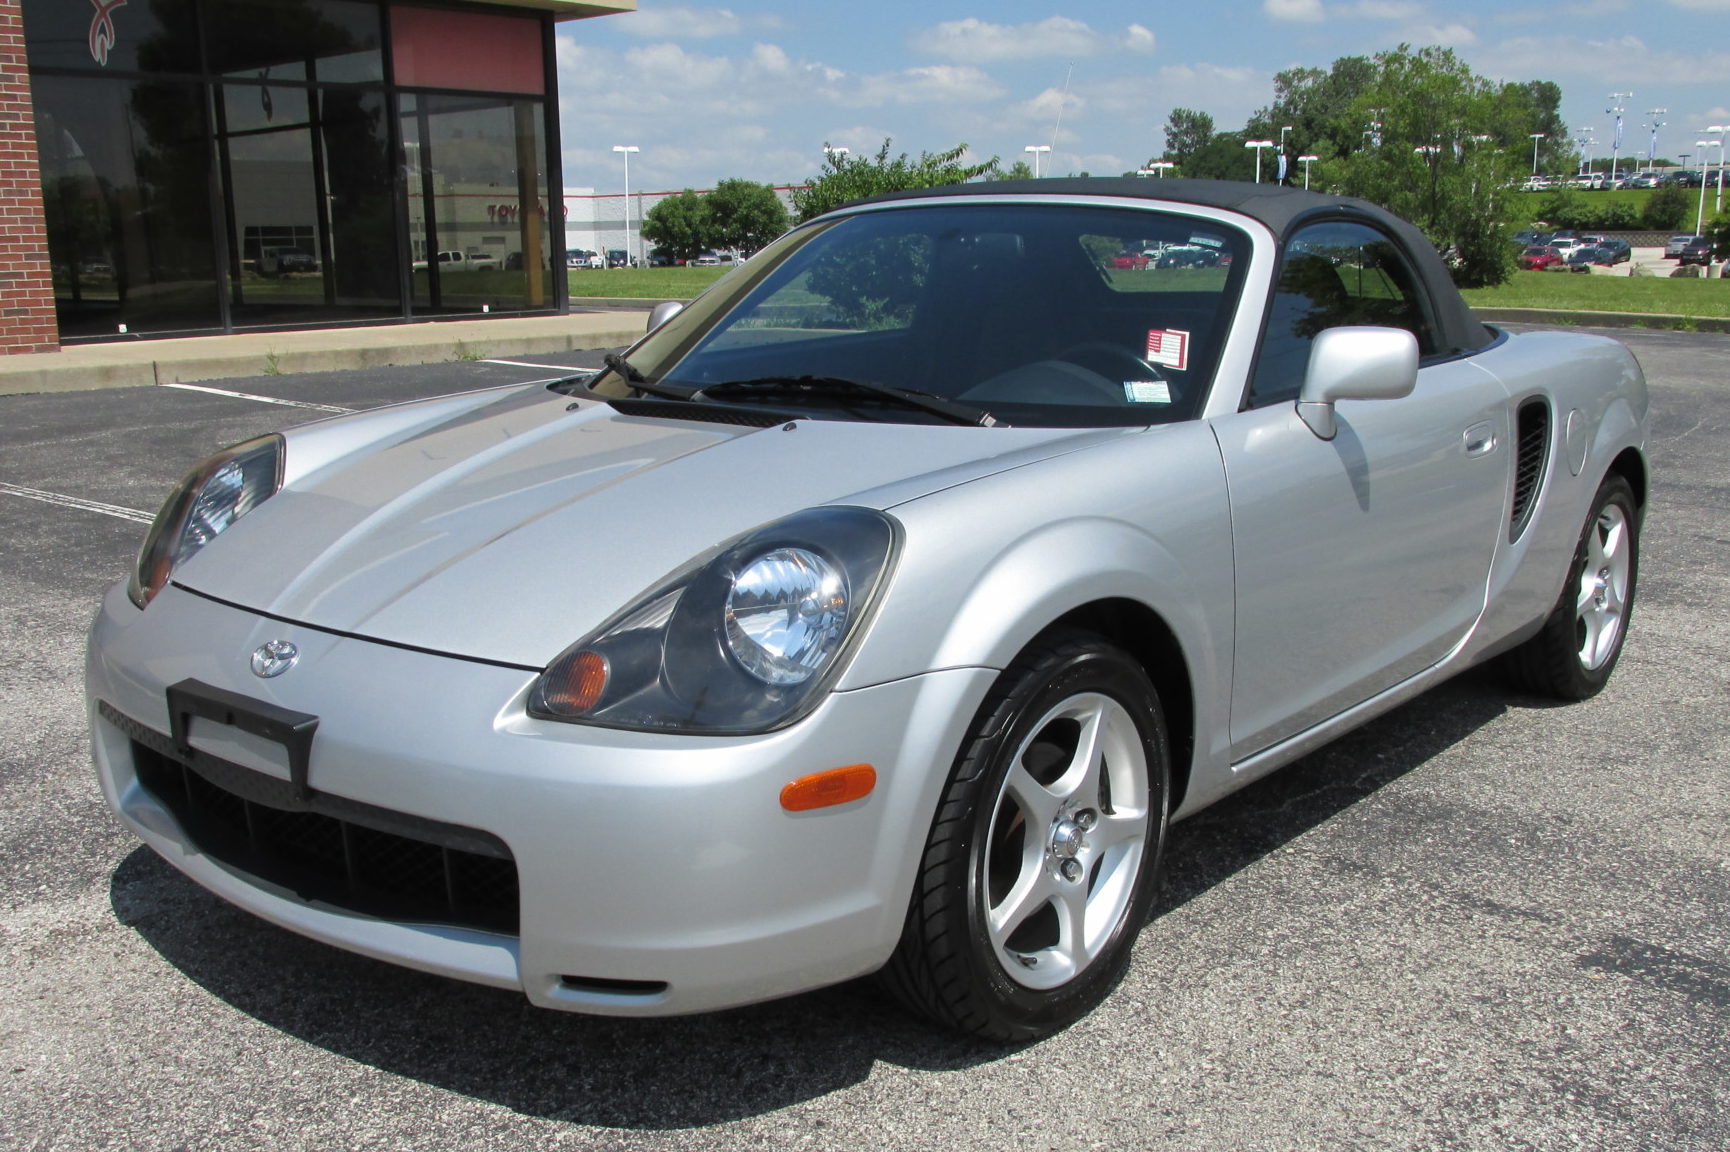 19k-Mile 2000 Toyota MR2 Spyder 5-Speed for sale on BaT Auctions - closed  on August 30, 2019 (Lot #22,457) | Bring a Trailer